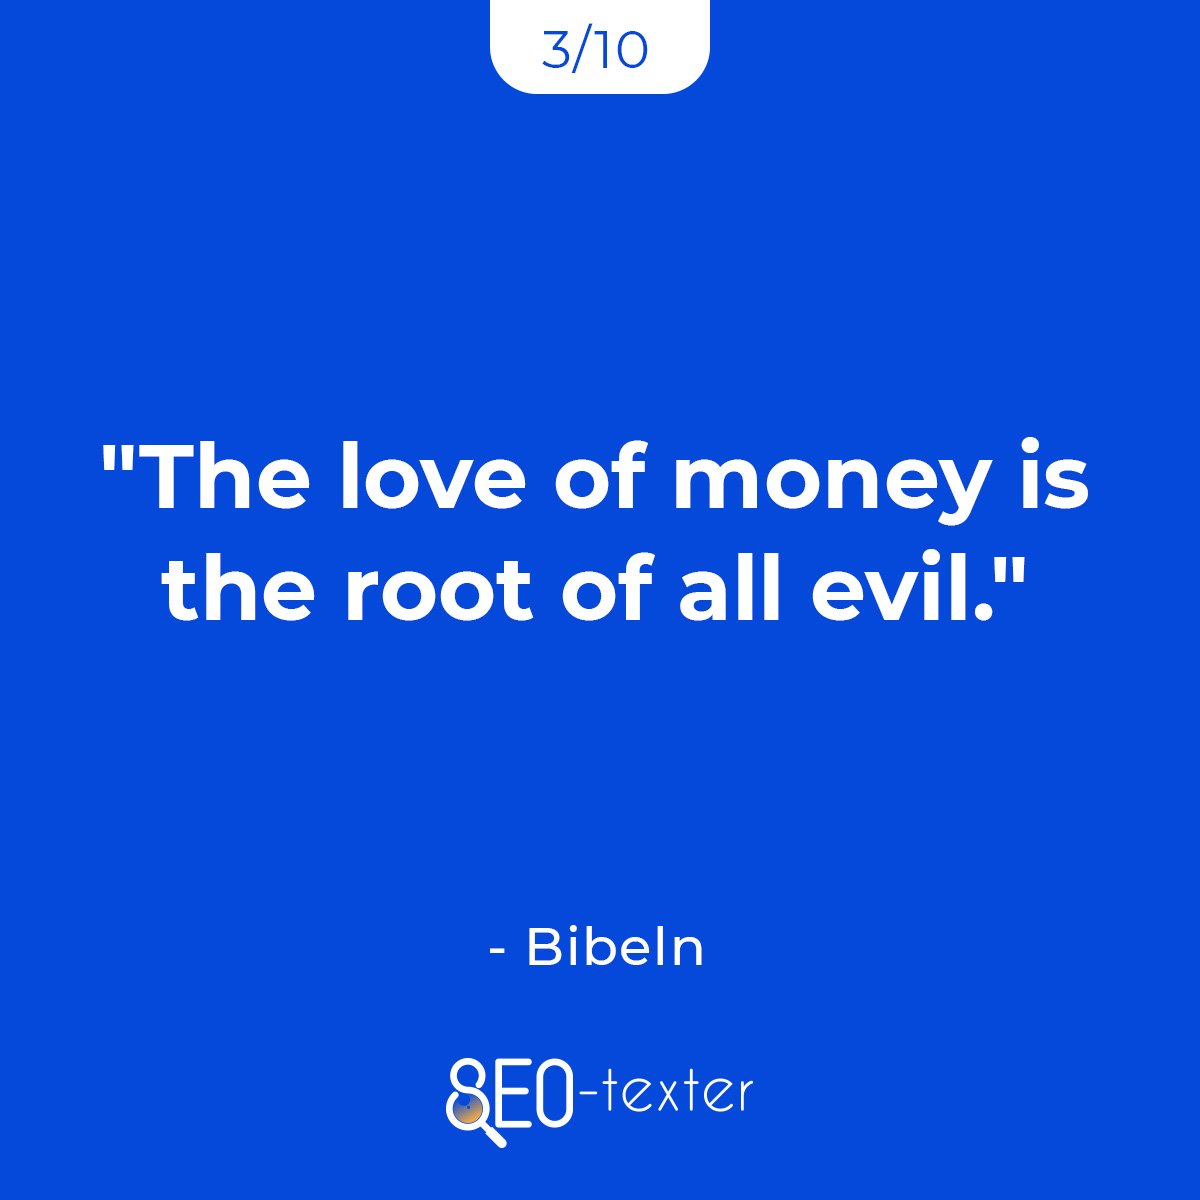 The love of money is the root of all evil